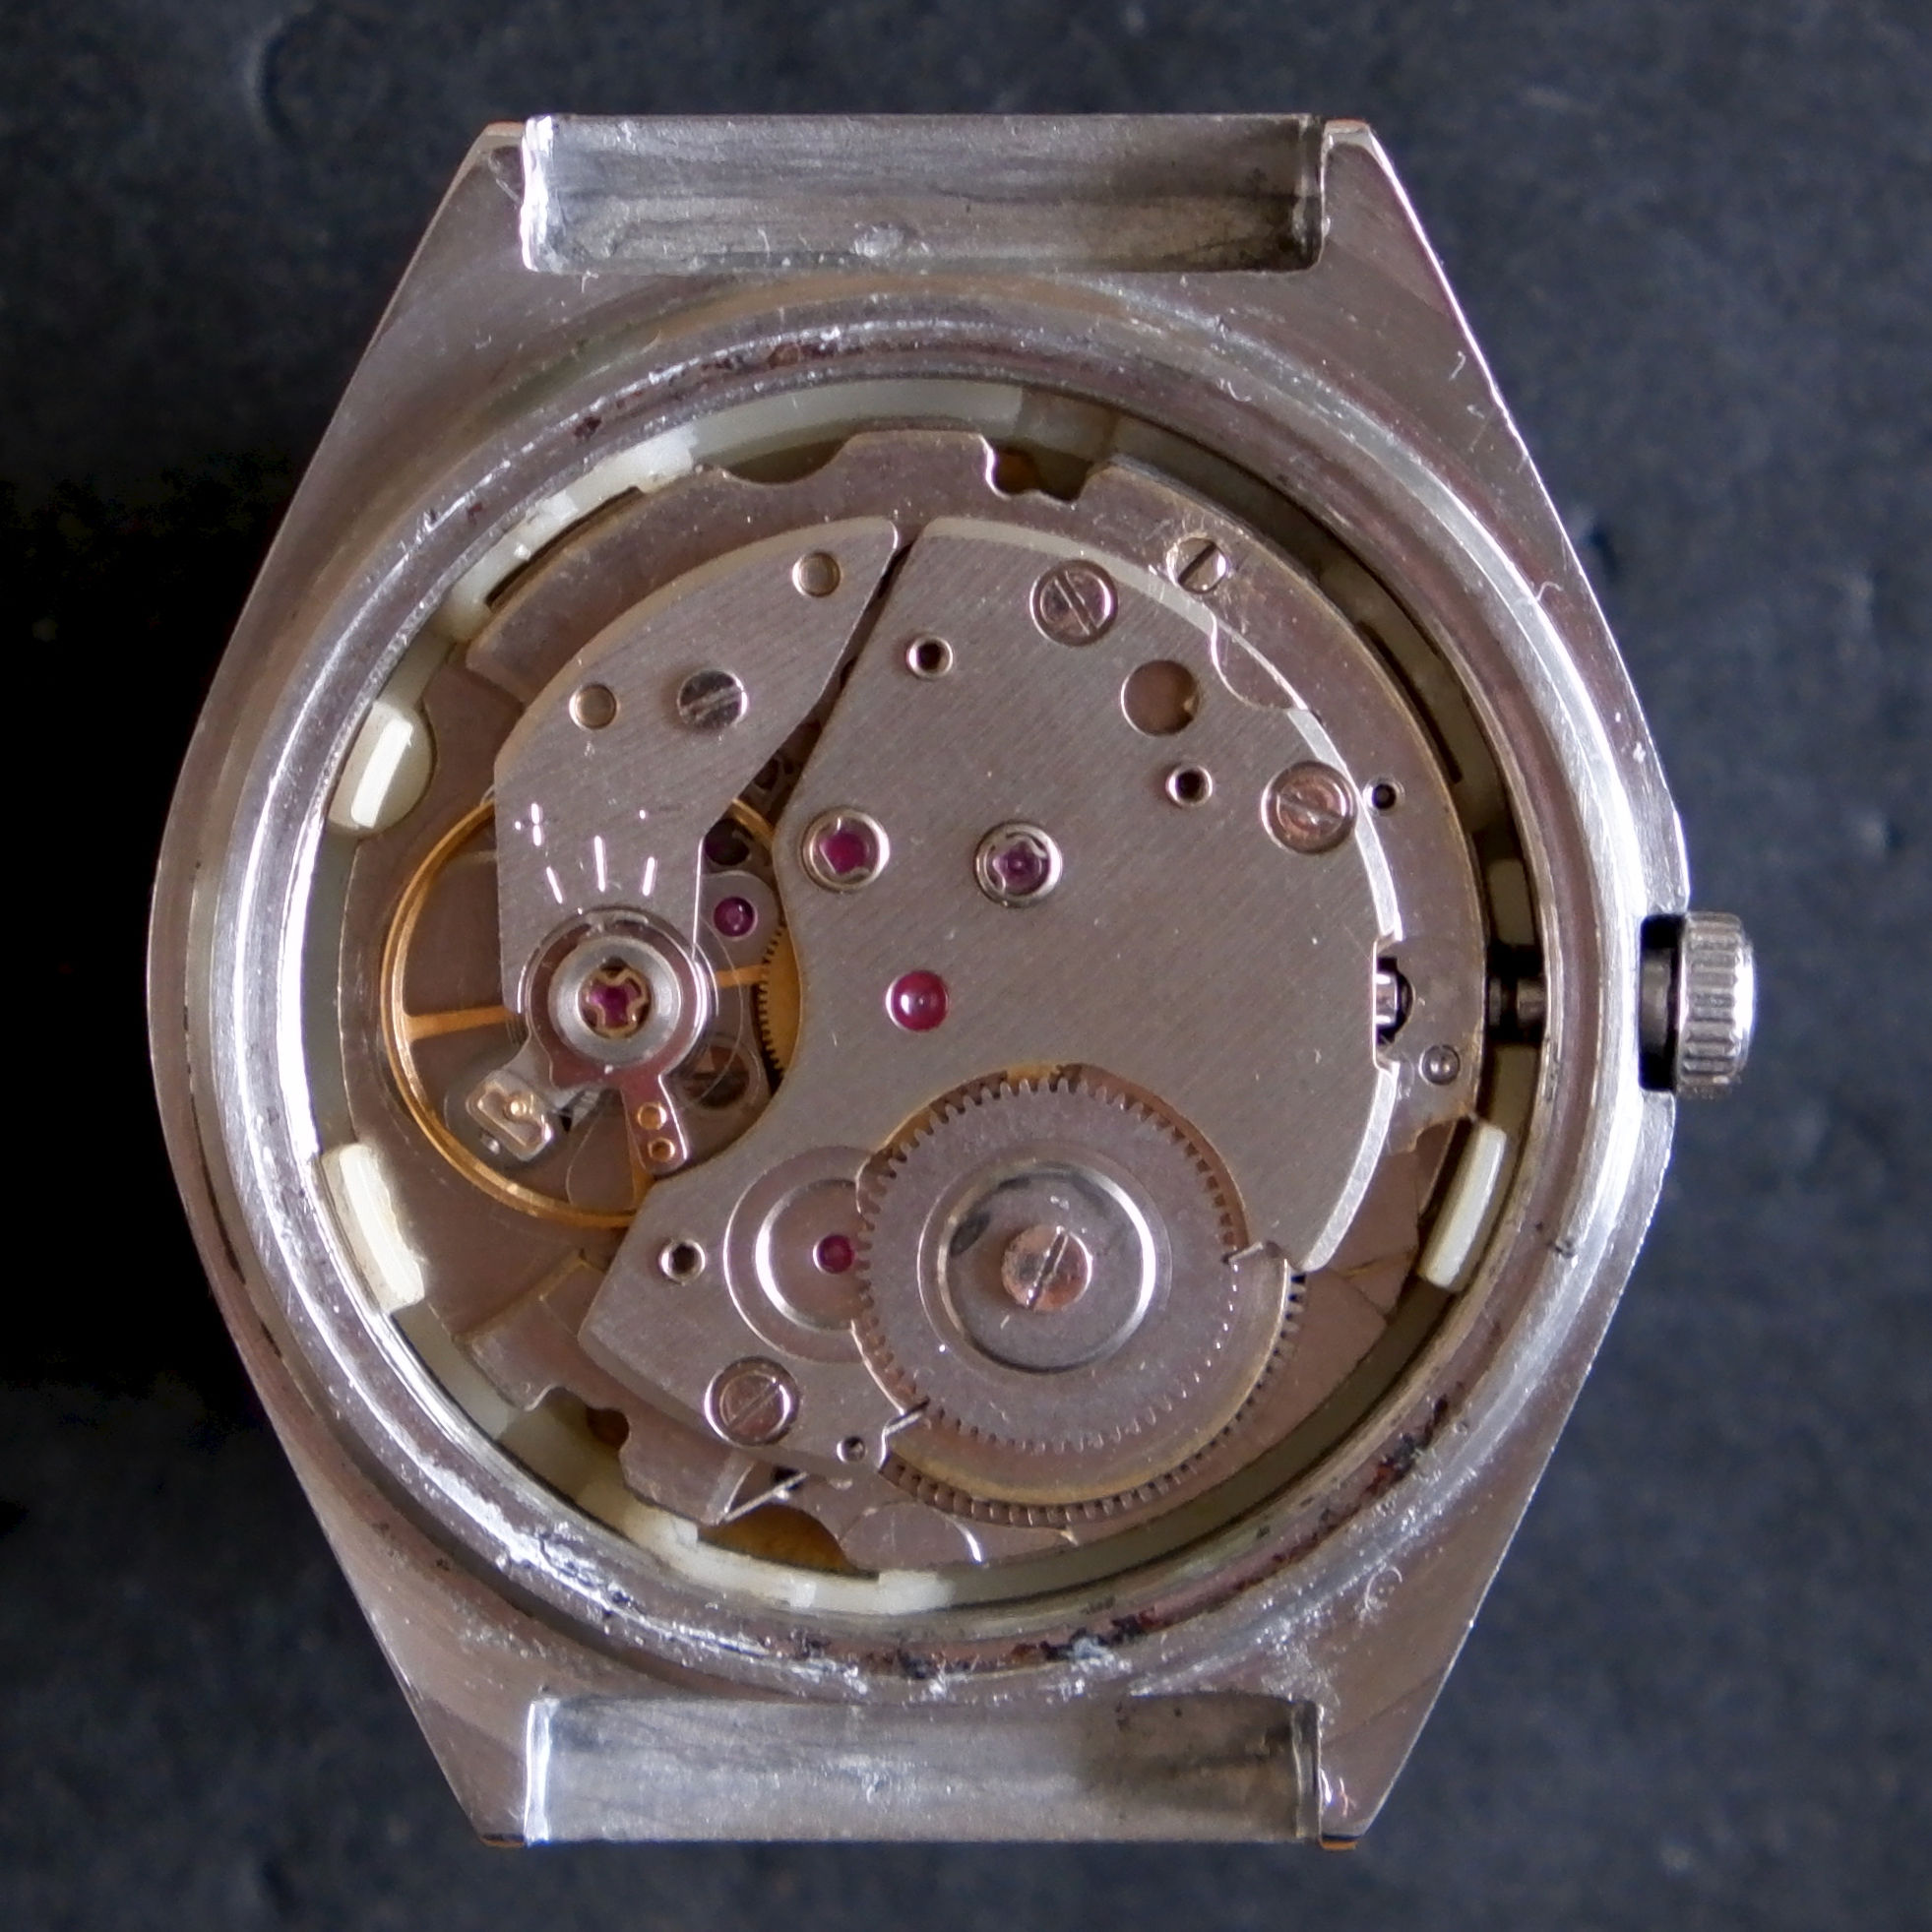 Seiko movement 6309A with rotor assembly removed.